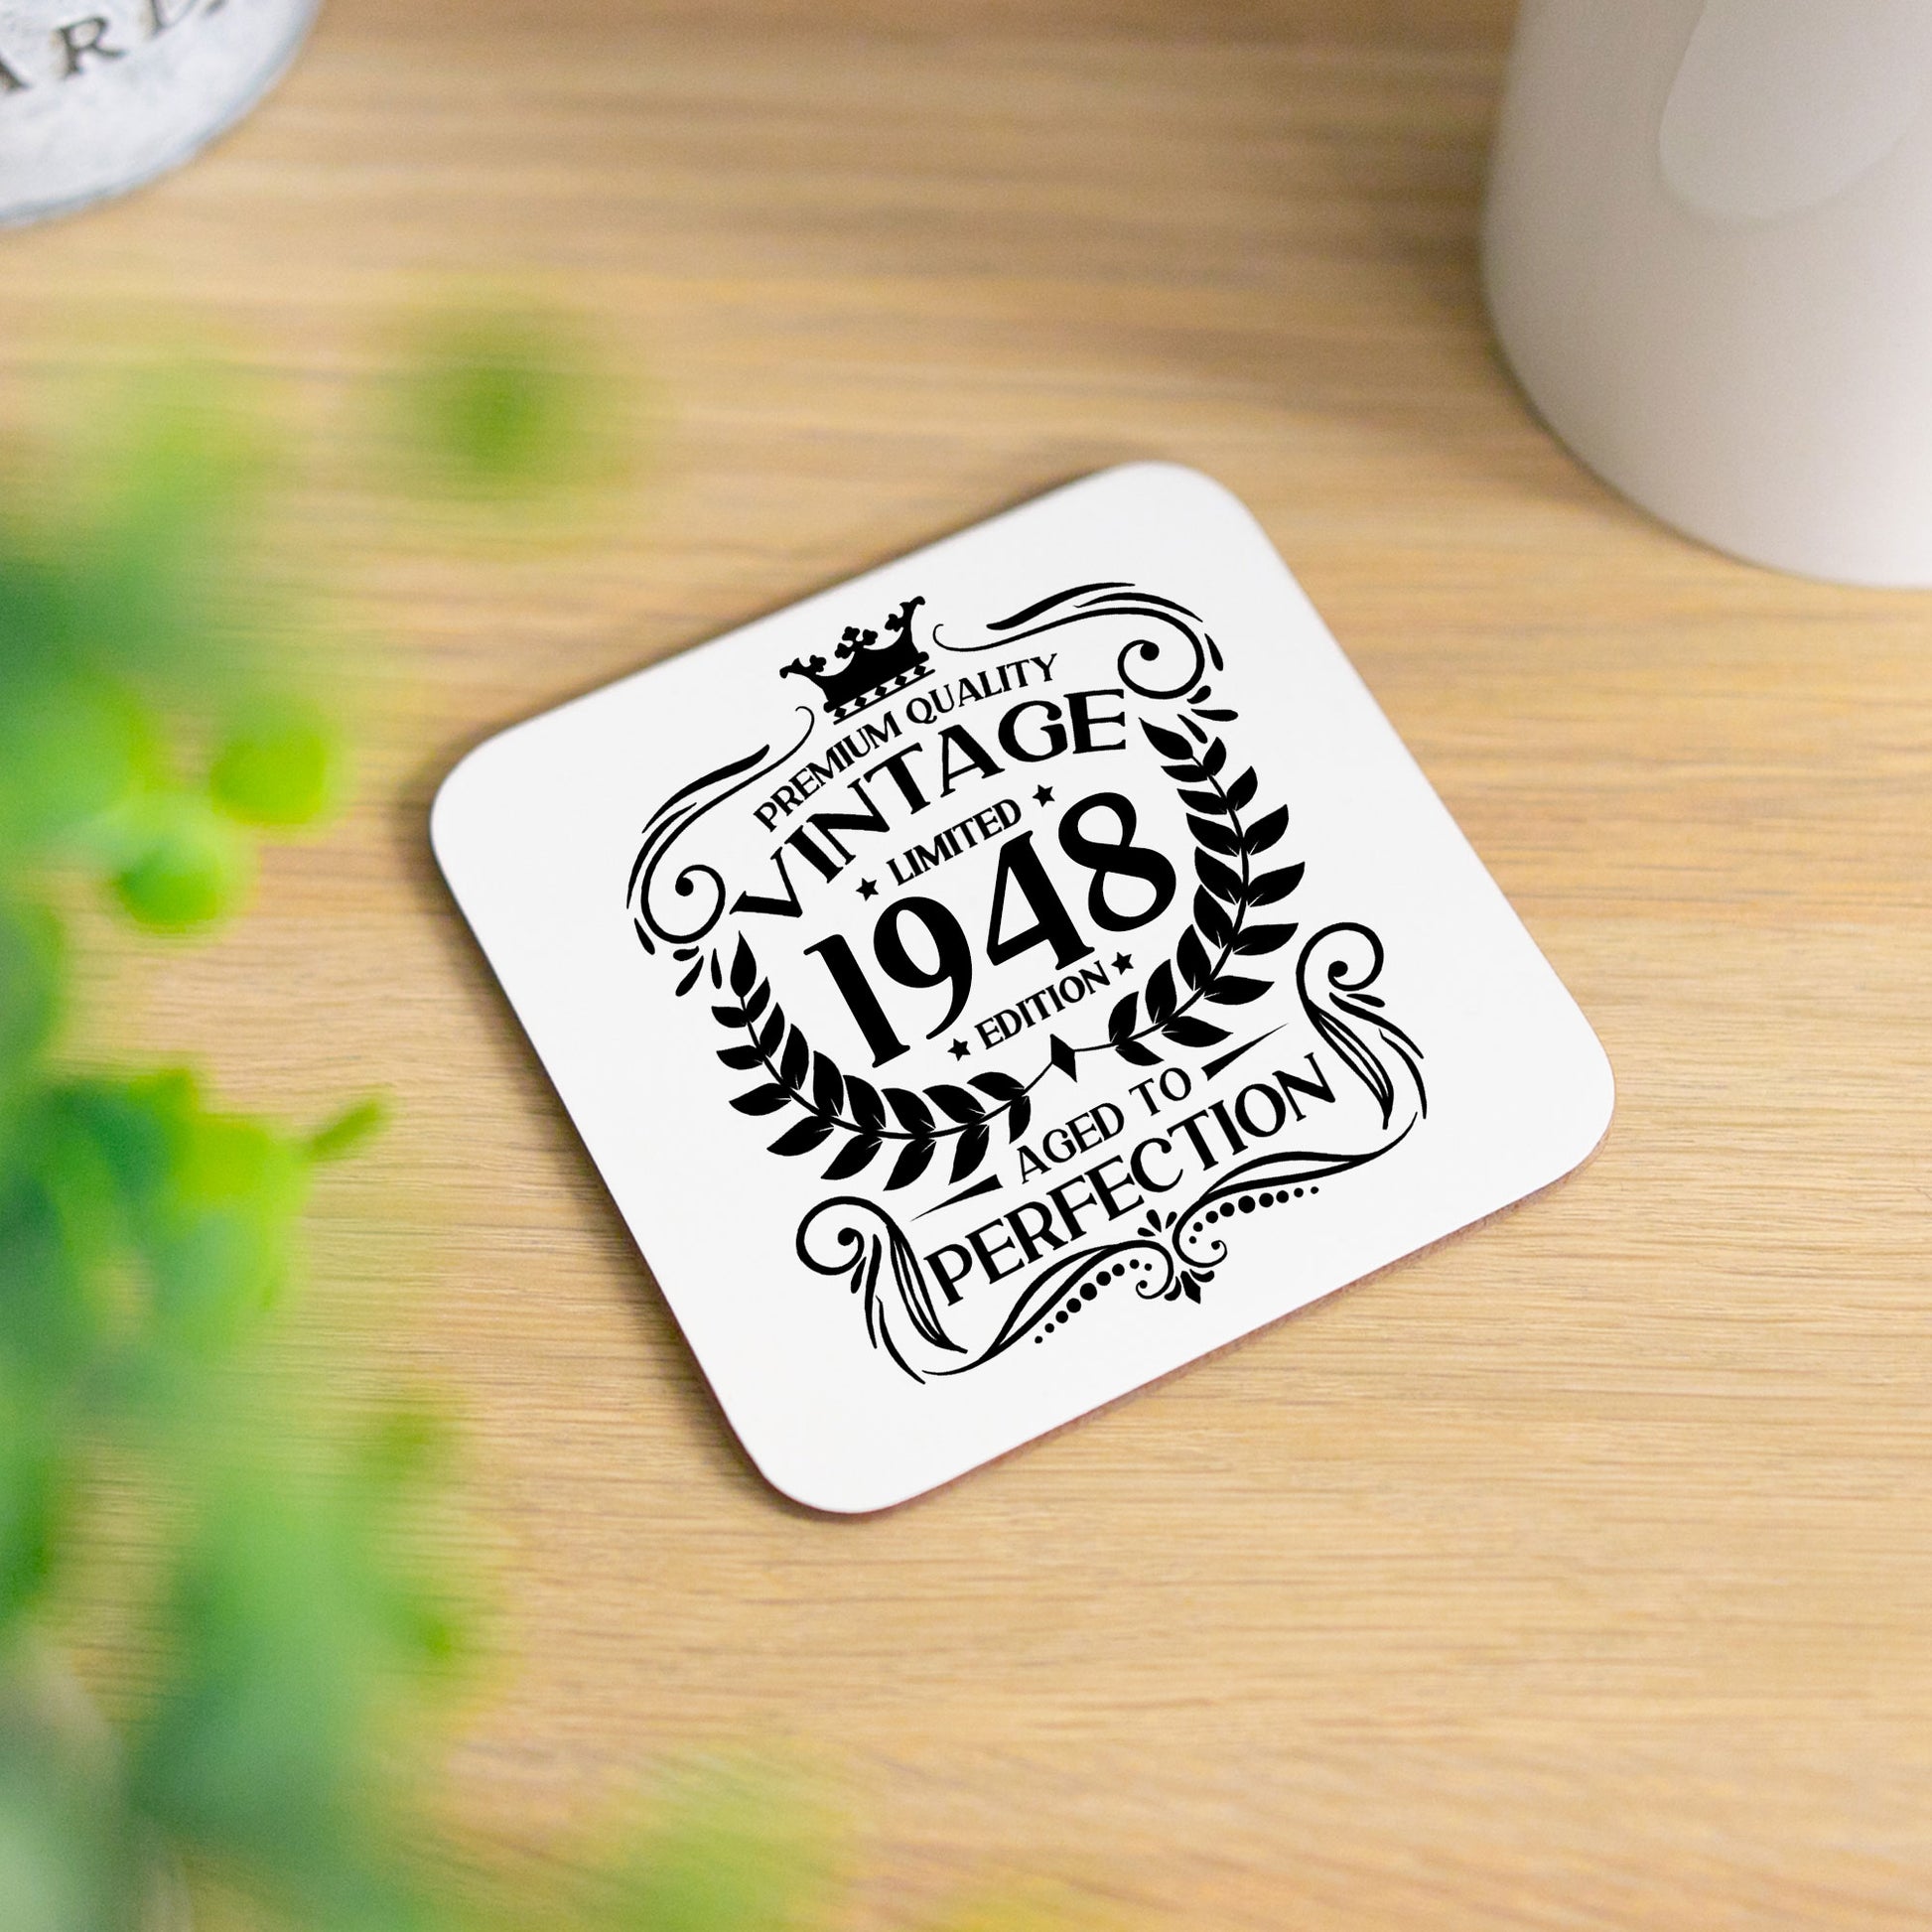 Vintage 1948 75th Birthday Engraved Wine Glass Gift  - Always Looking Good - Glass & Printed Coaster  